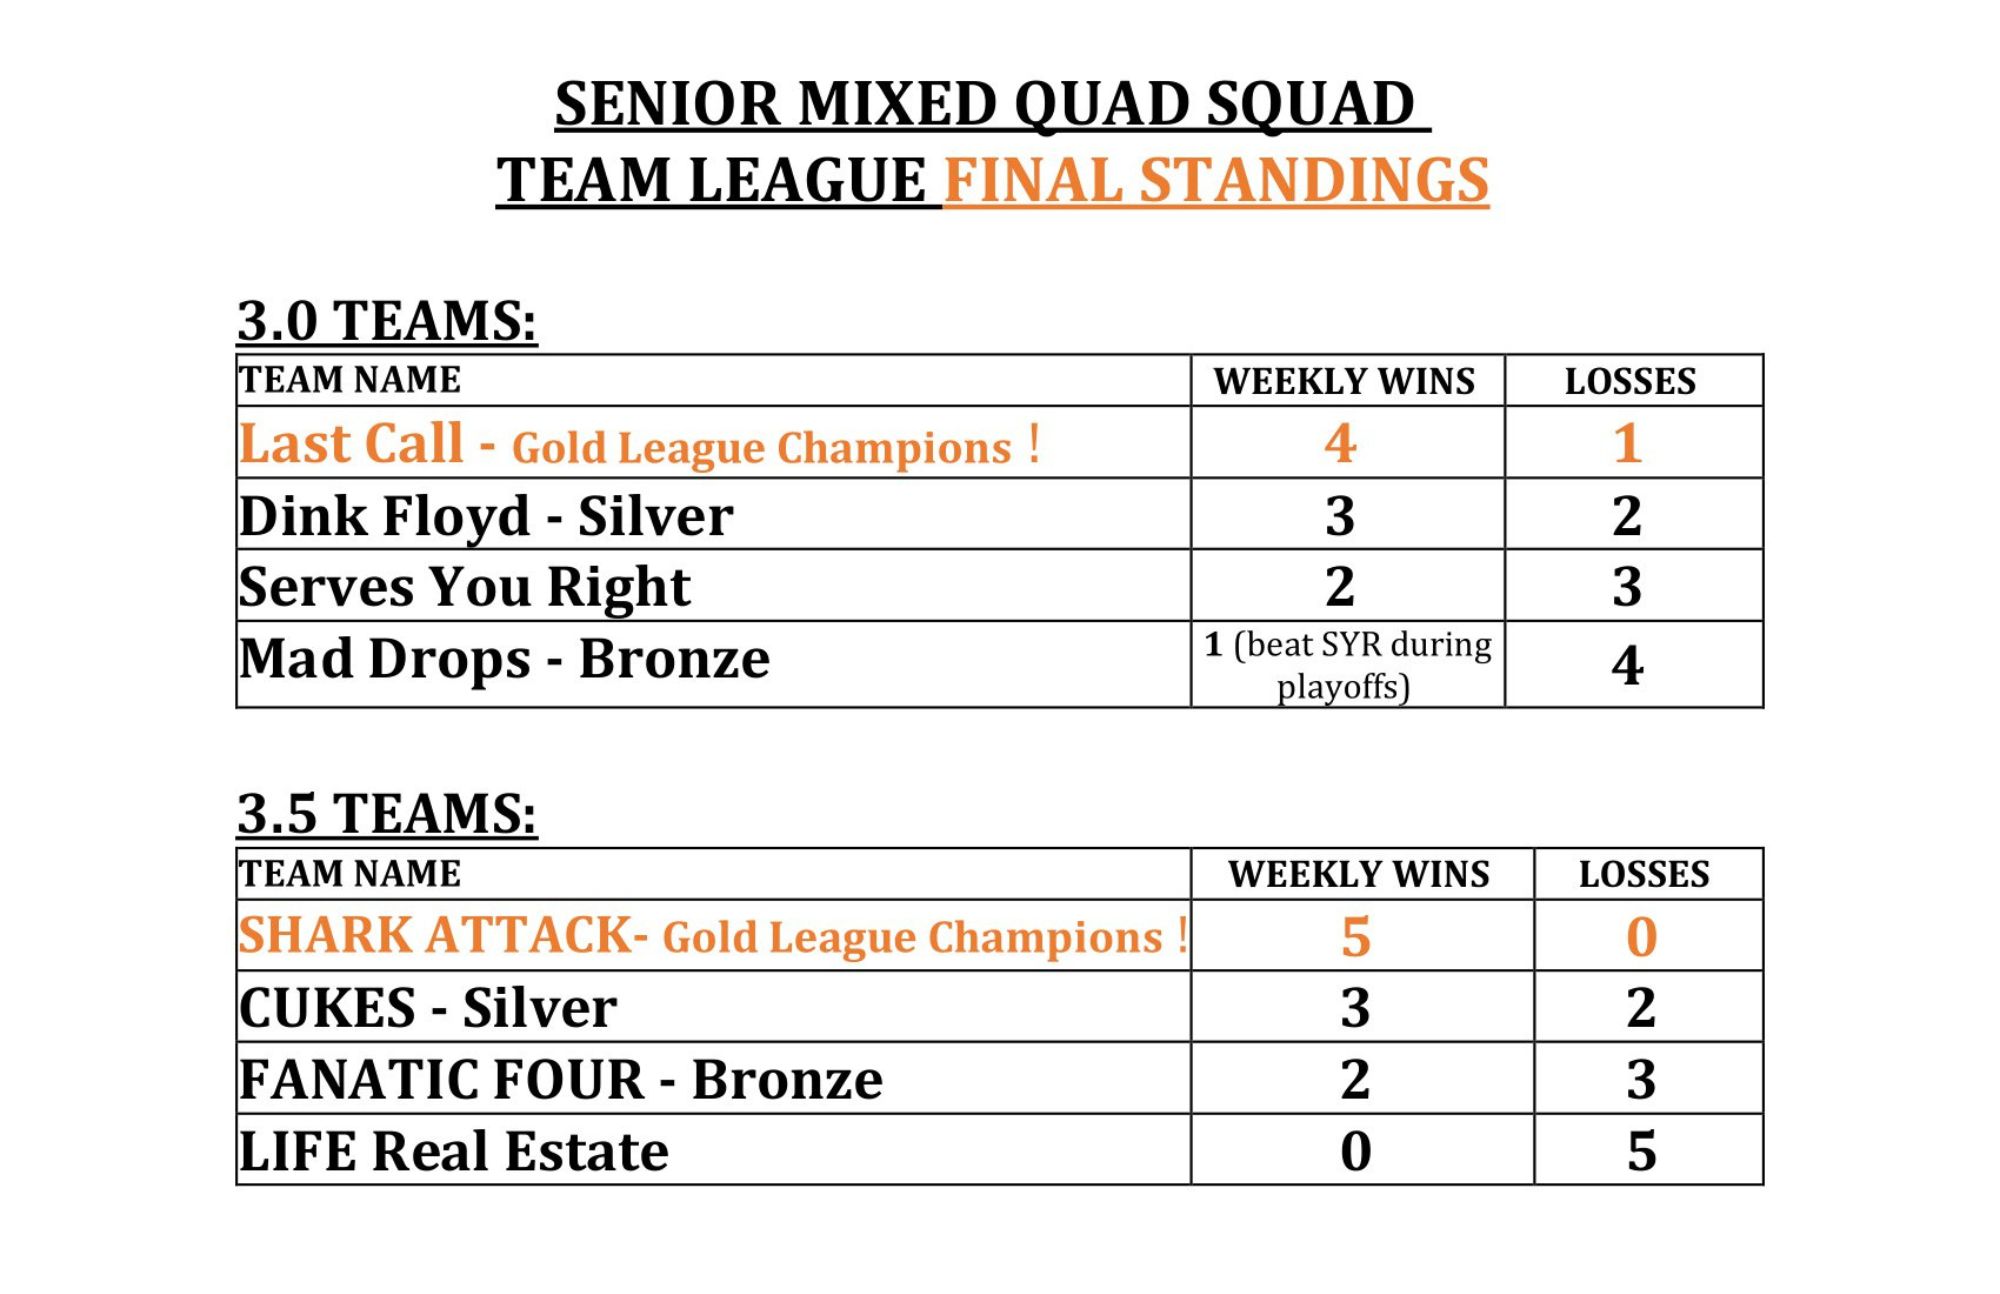 Sr. Mixed Squad Final Standings 12.29.23